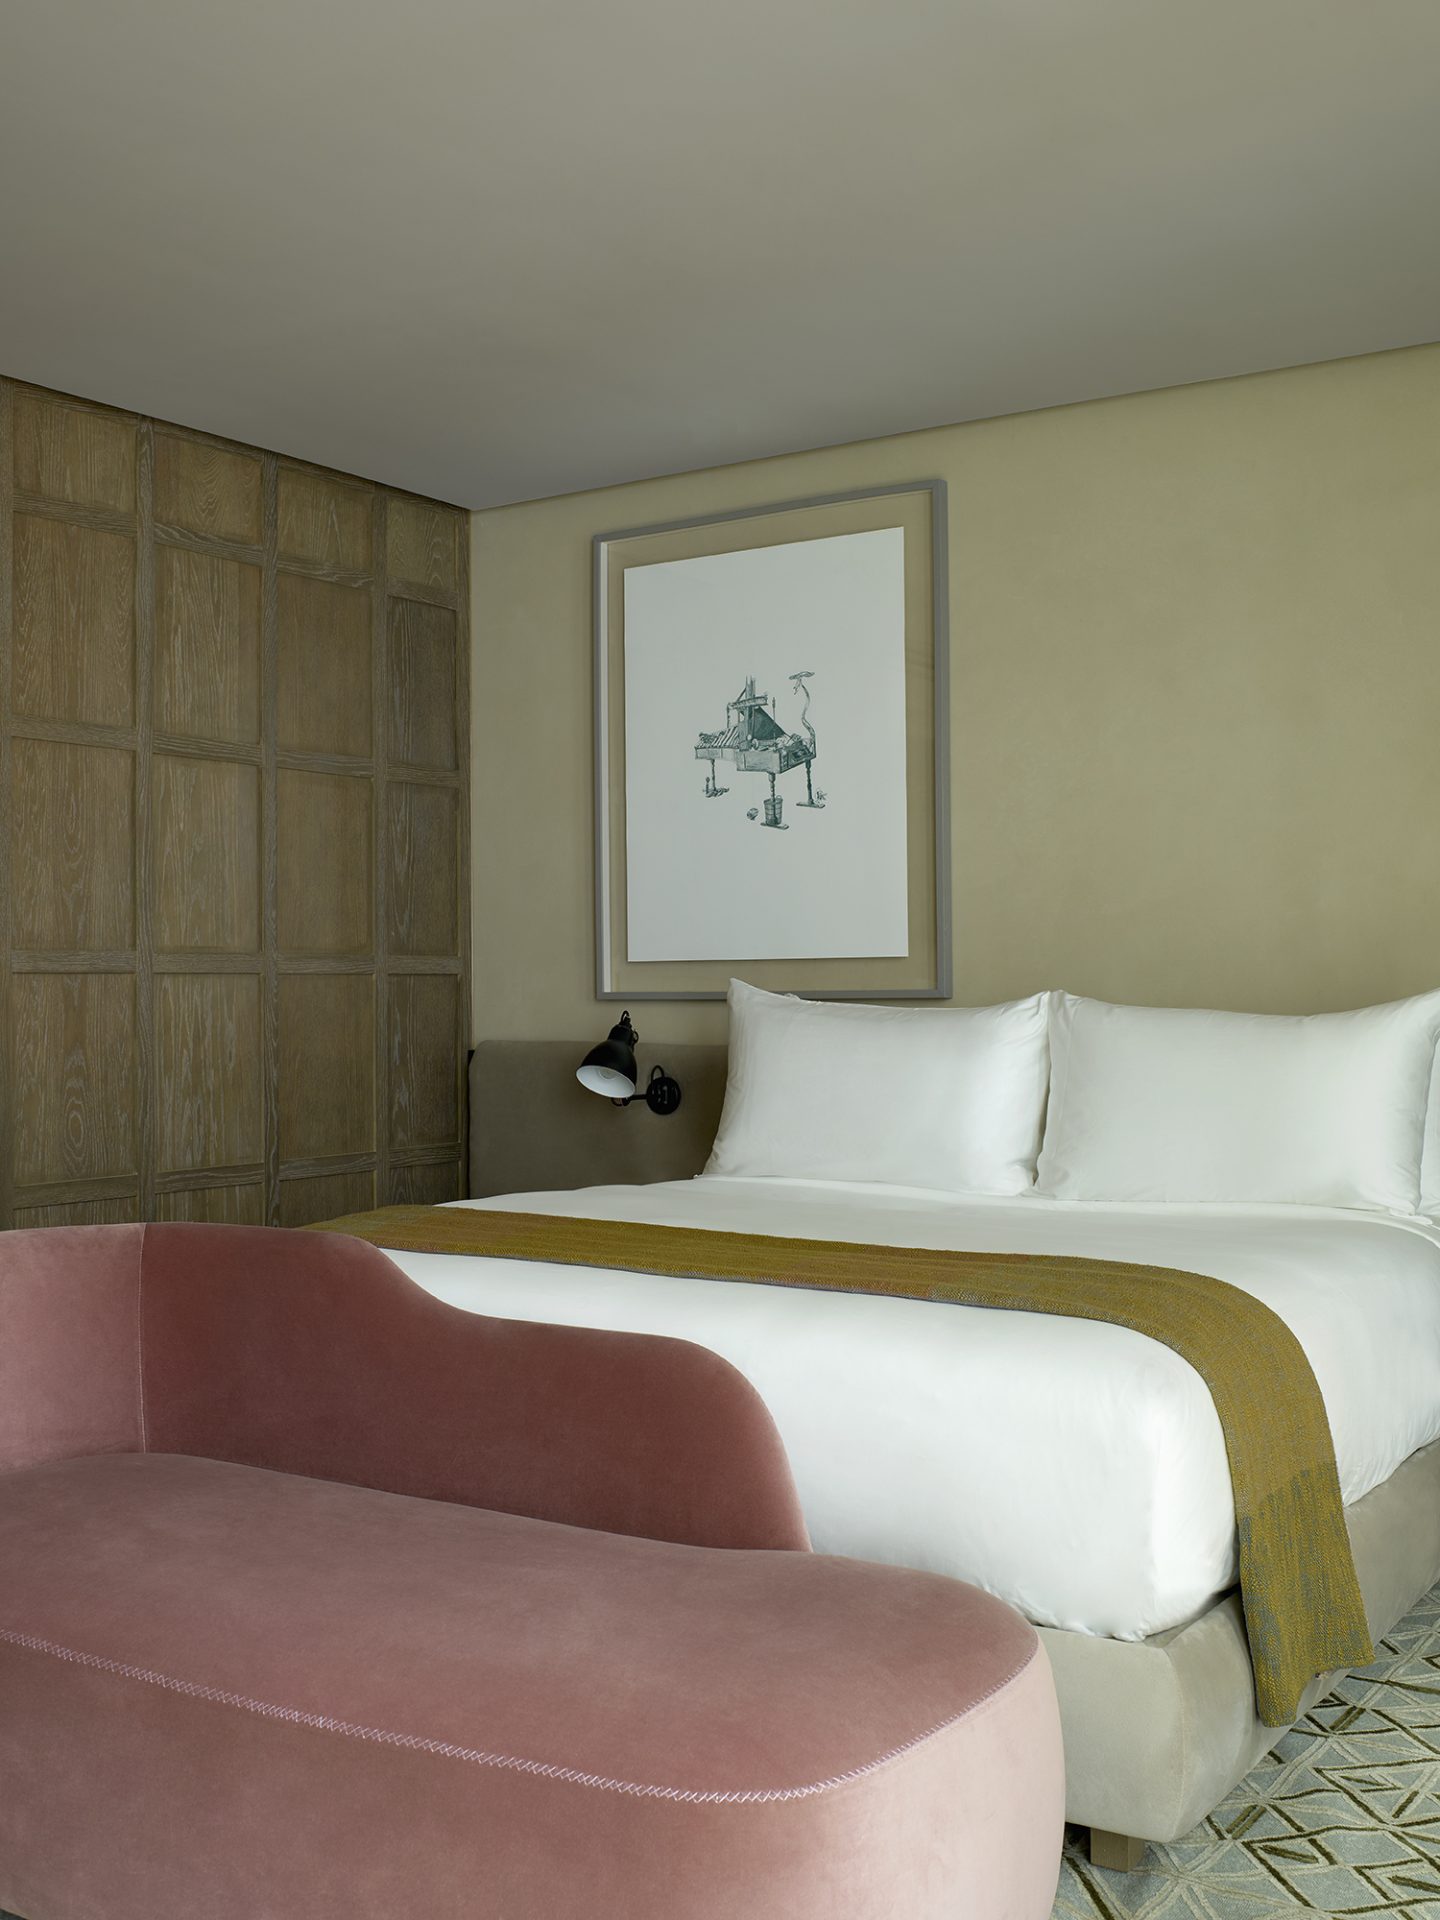 Muted tones and wood paneled walls inside The Londoner guestrooms